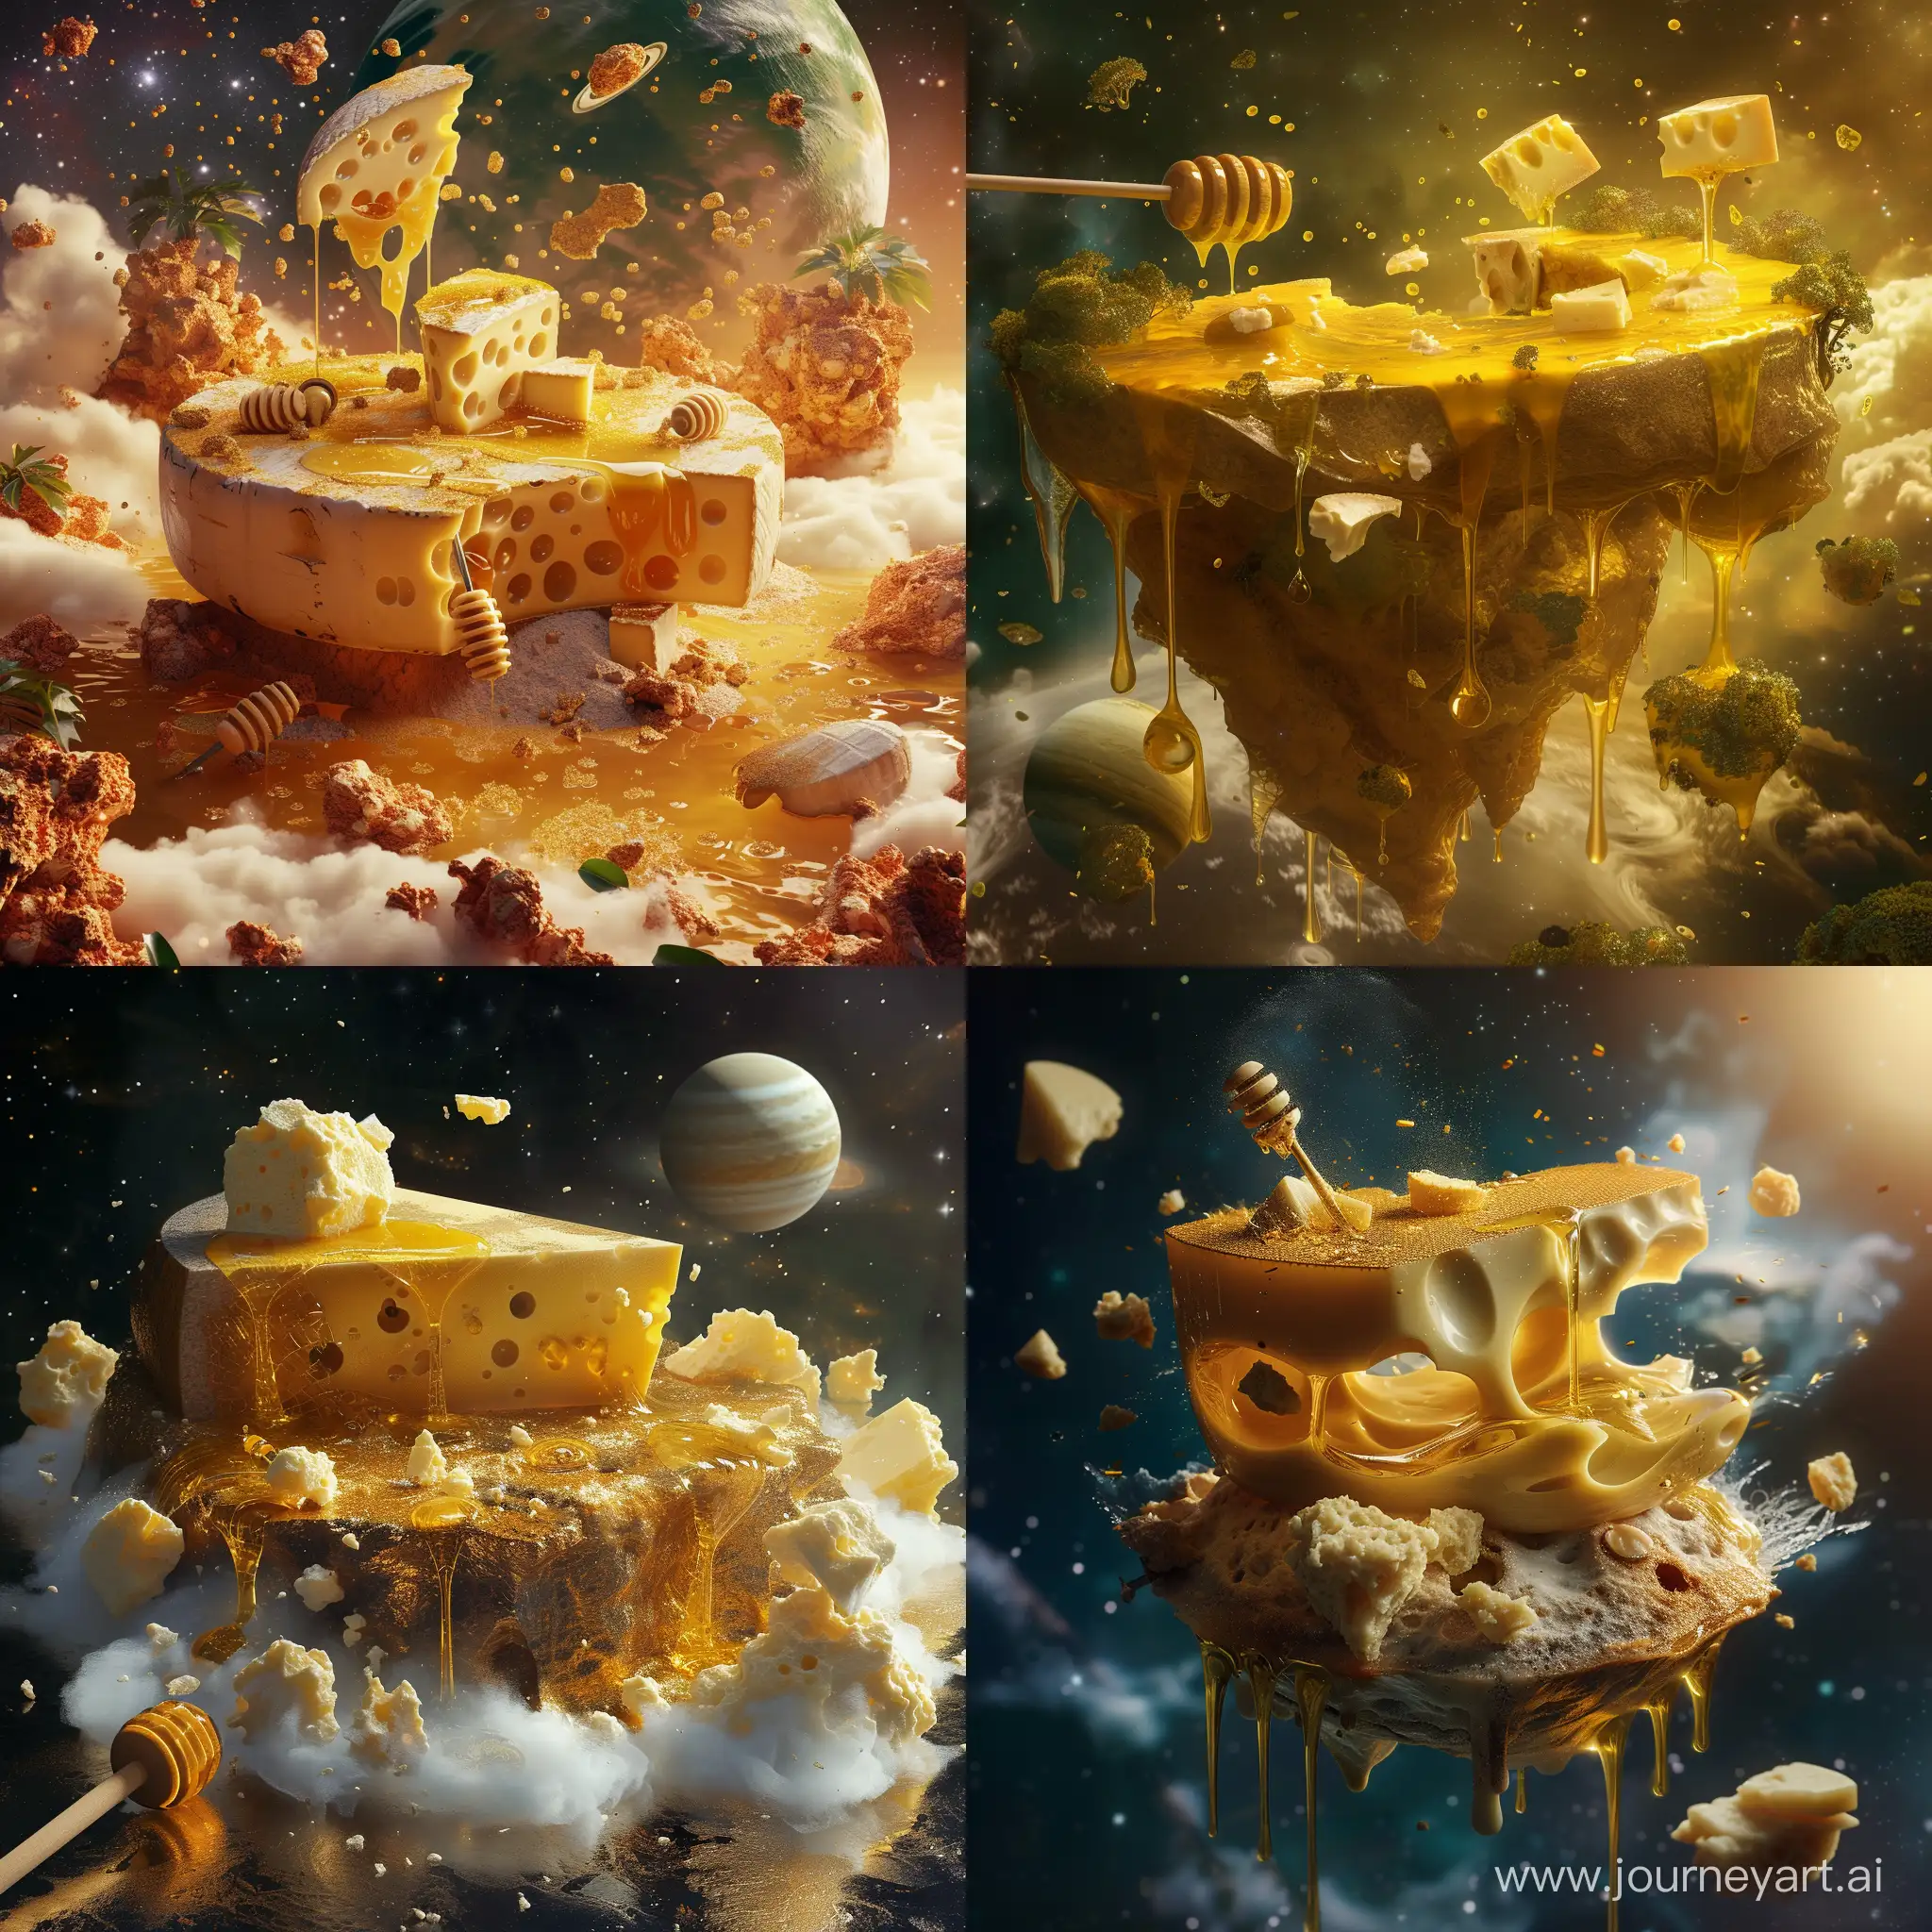 Fantasy-Island-Collage-Mixing-Earth-Cheese-Gold-and-Honey-in-a-Galaxy